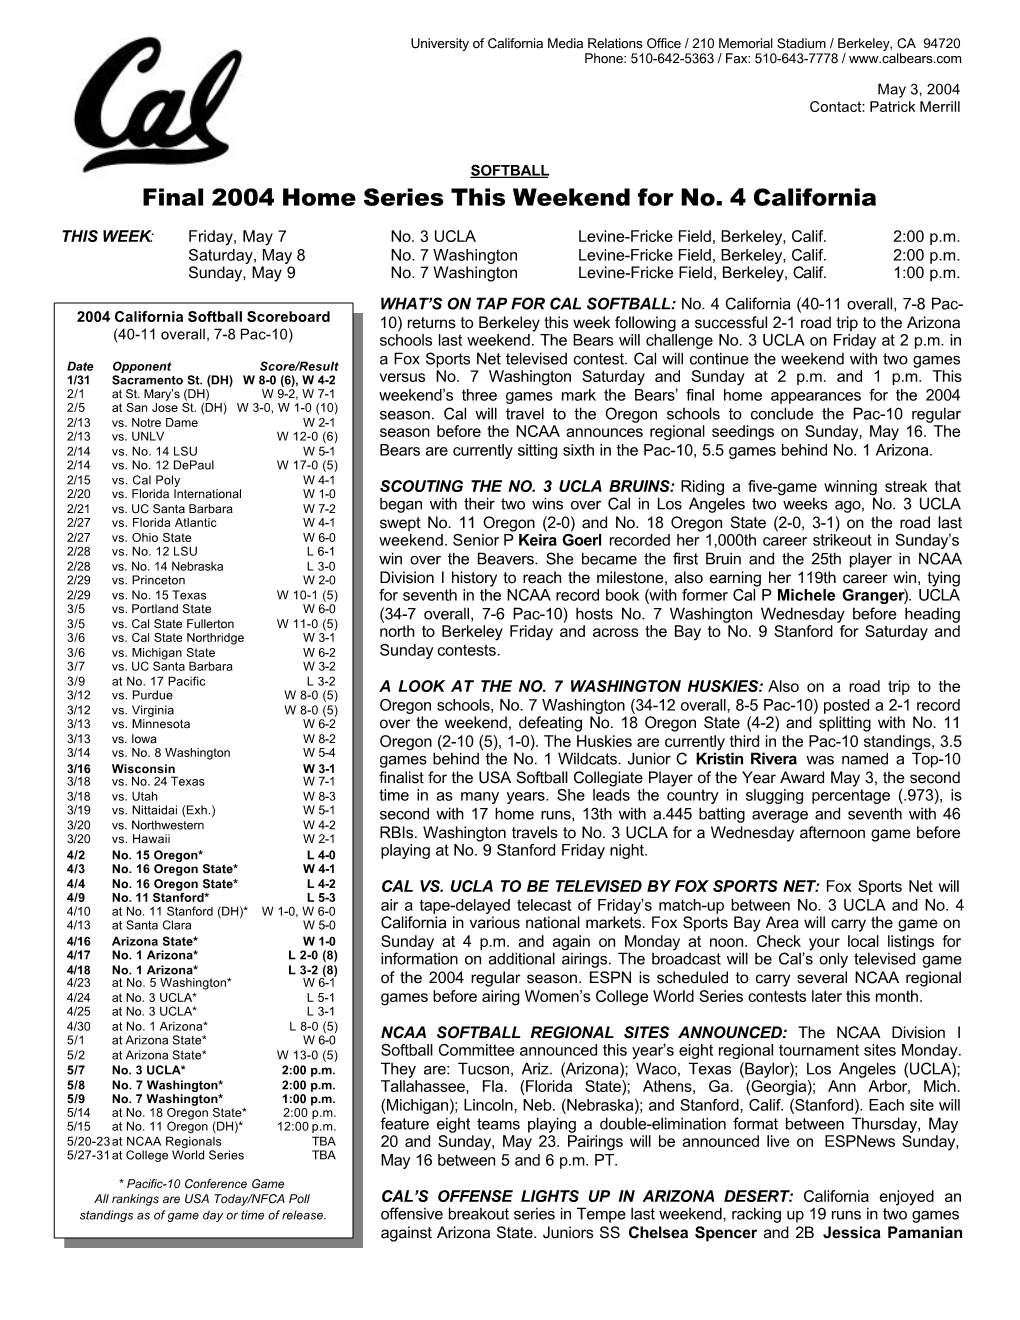 Final 2004 Home Series This Weekend for No. 4 California